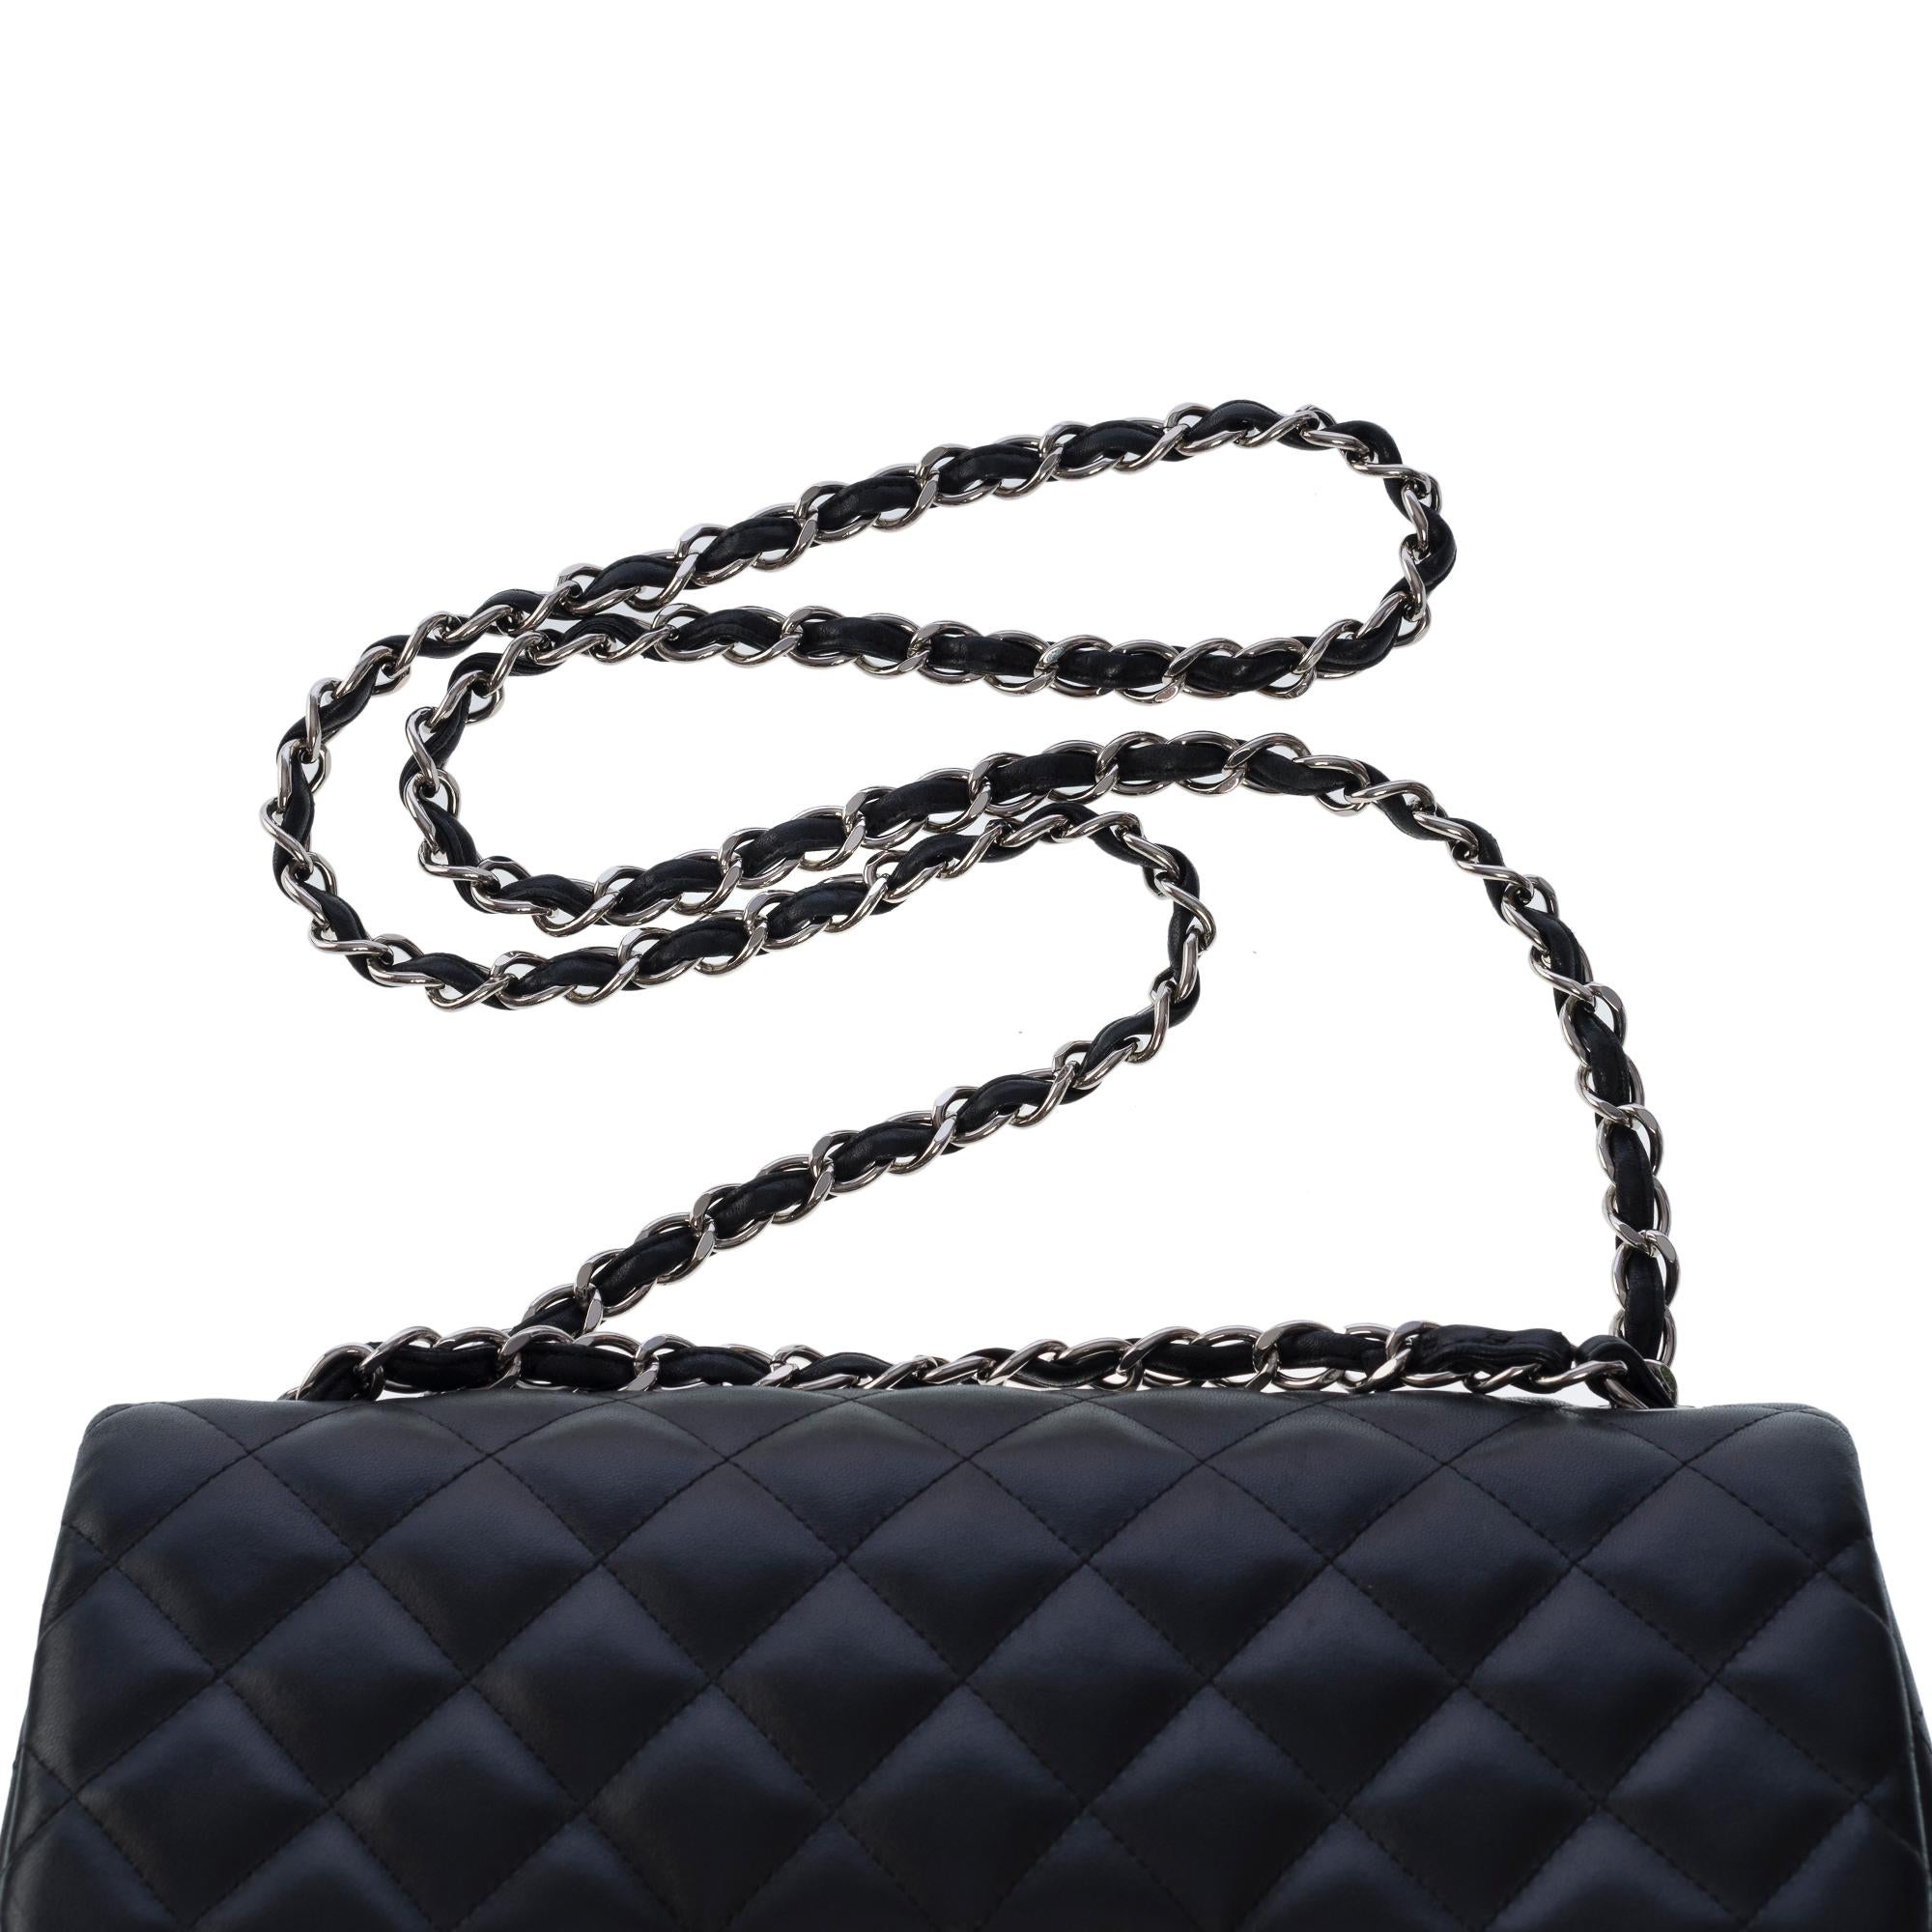 Chanel Timeless Jumbo double flap shoulder bag in black quilted lamb leather, SHW 5